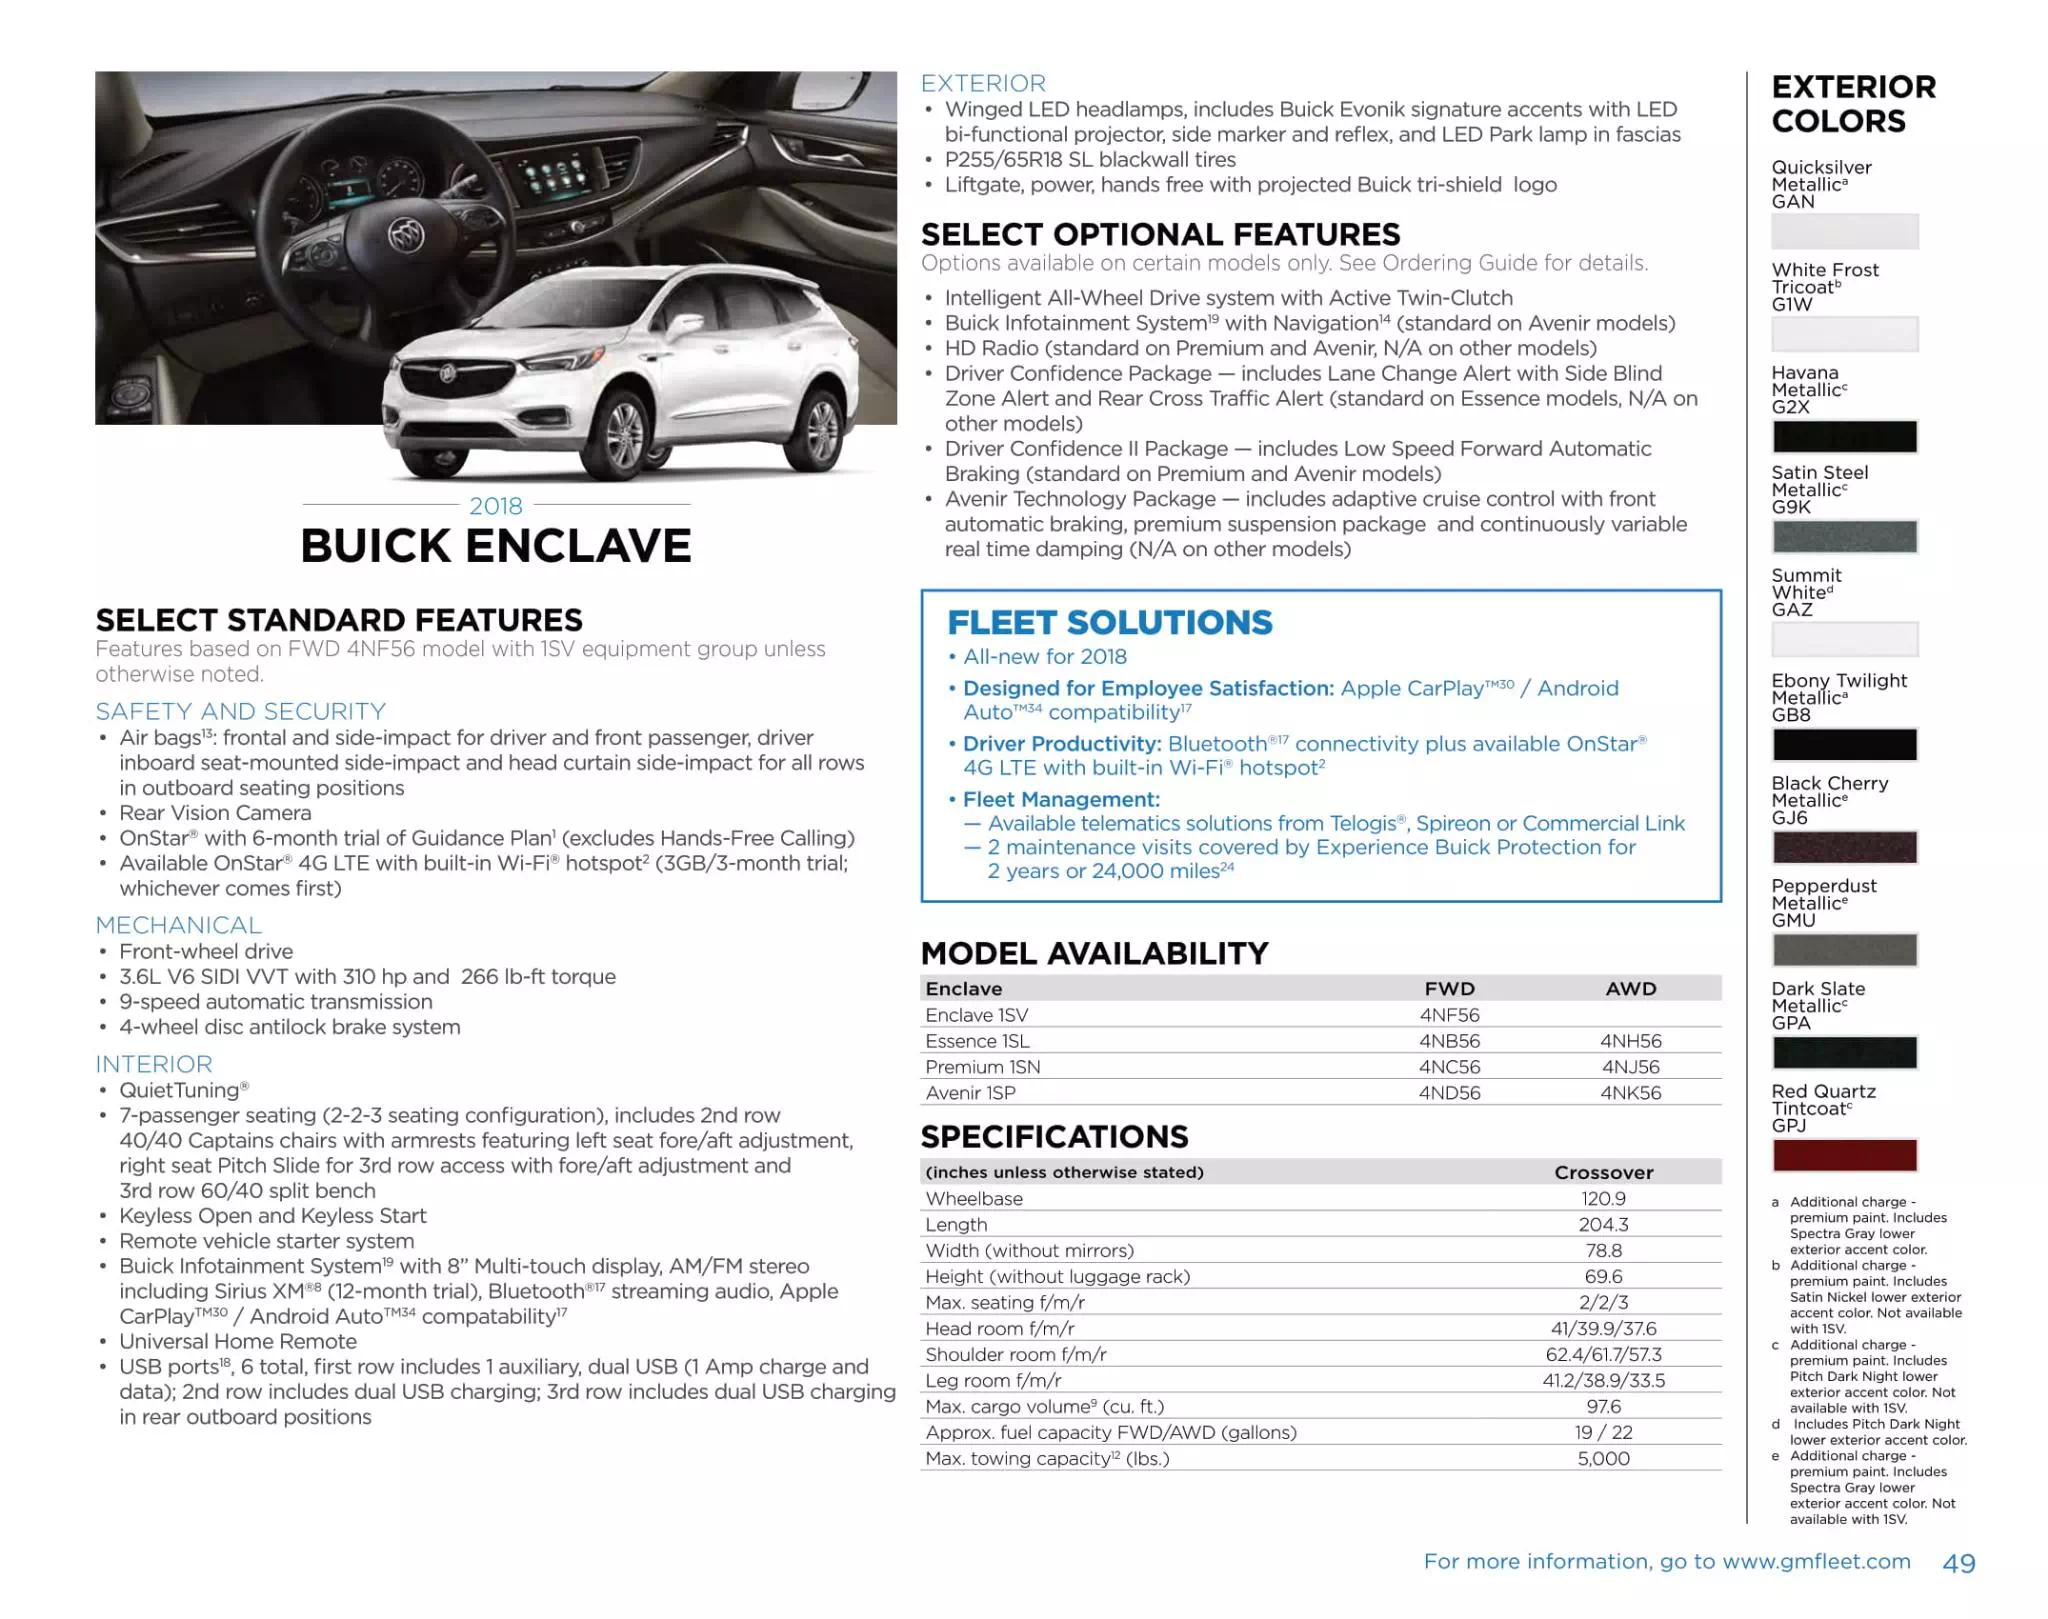 General Motors Sell sheet for Buick Enclave Models, and Color Codes in 2018